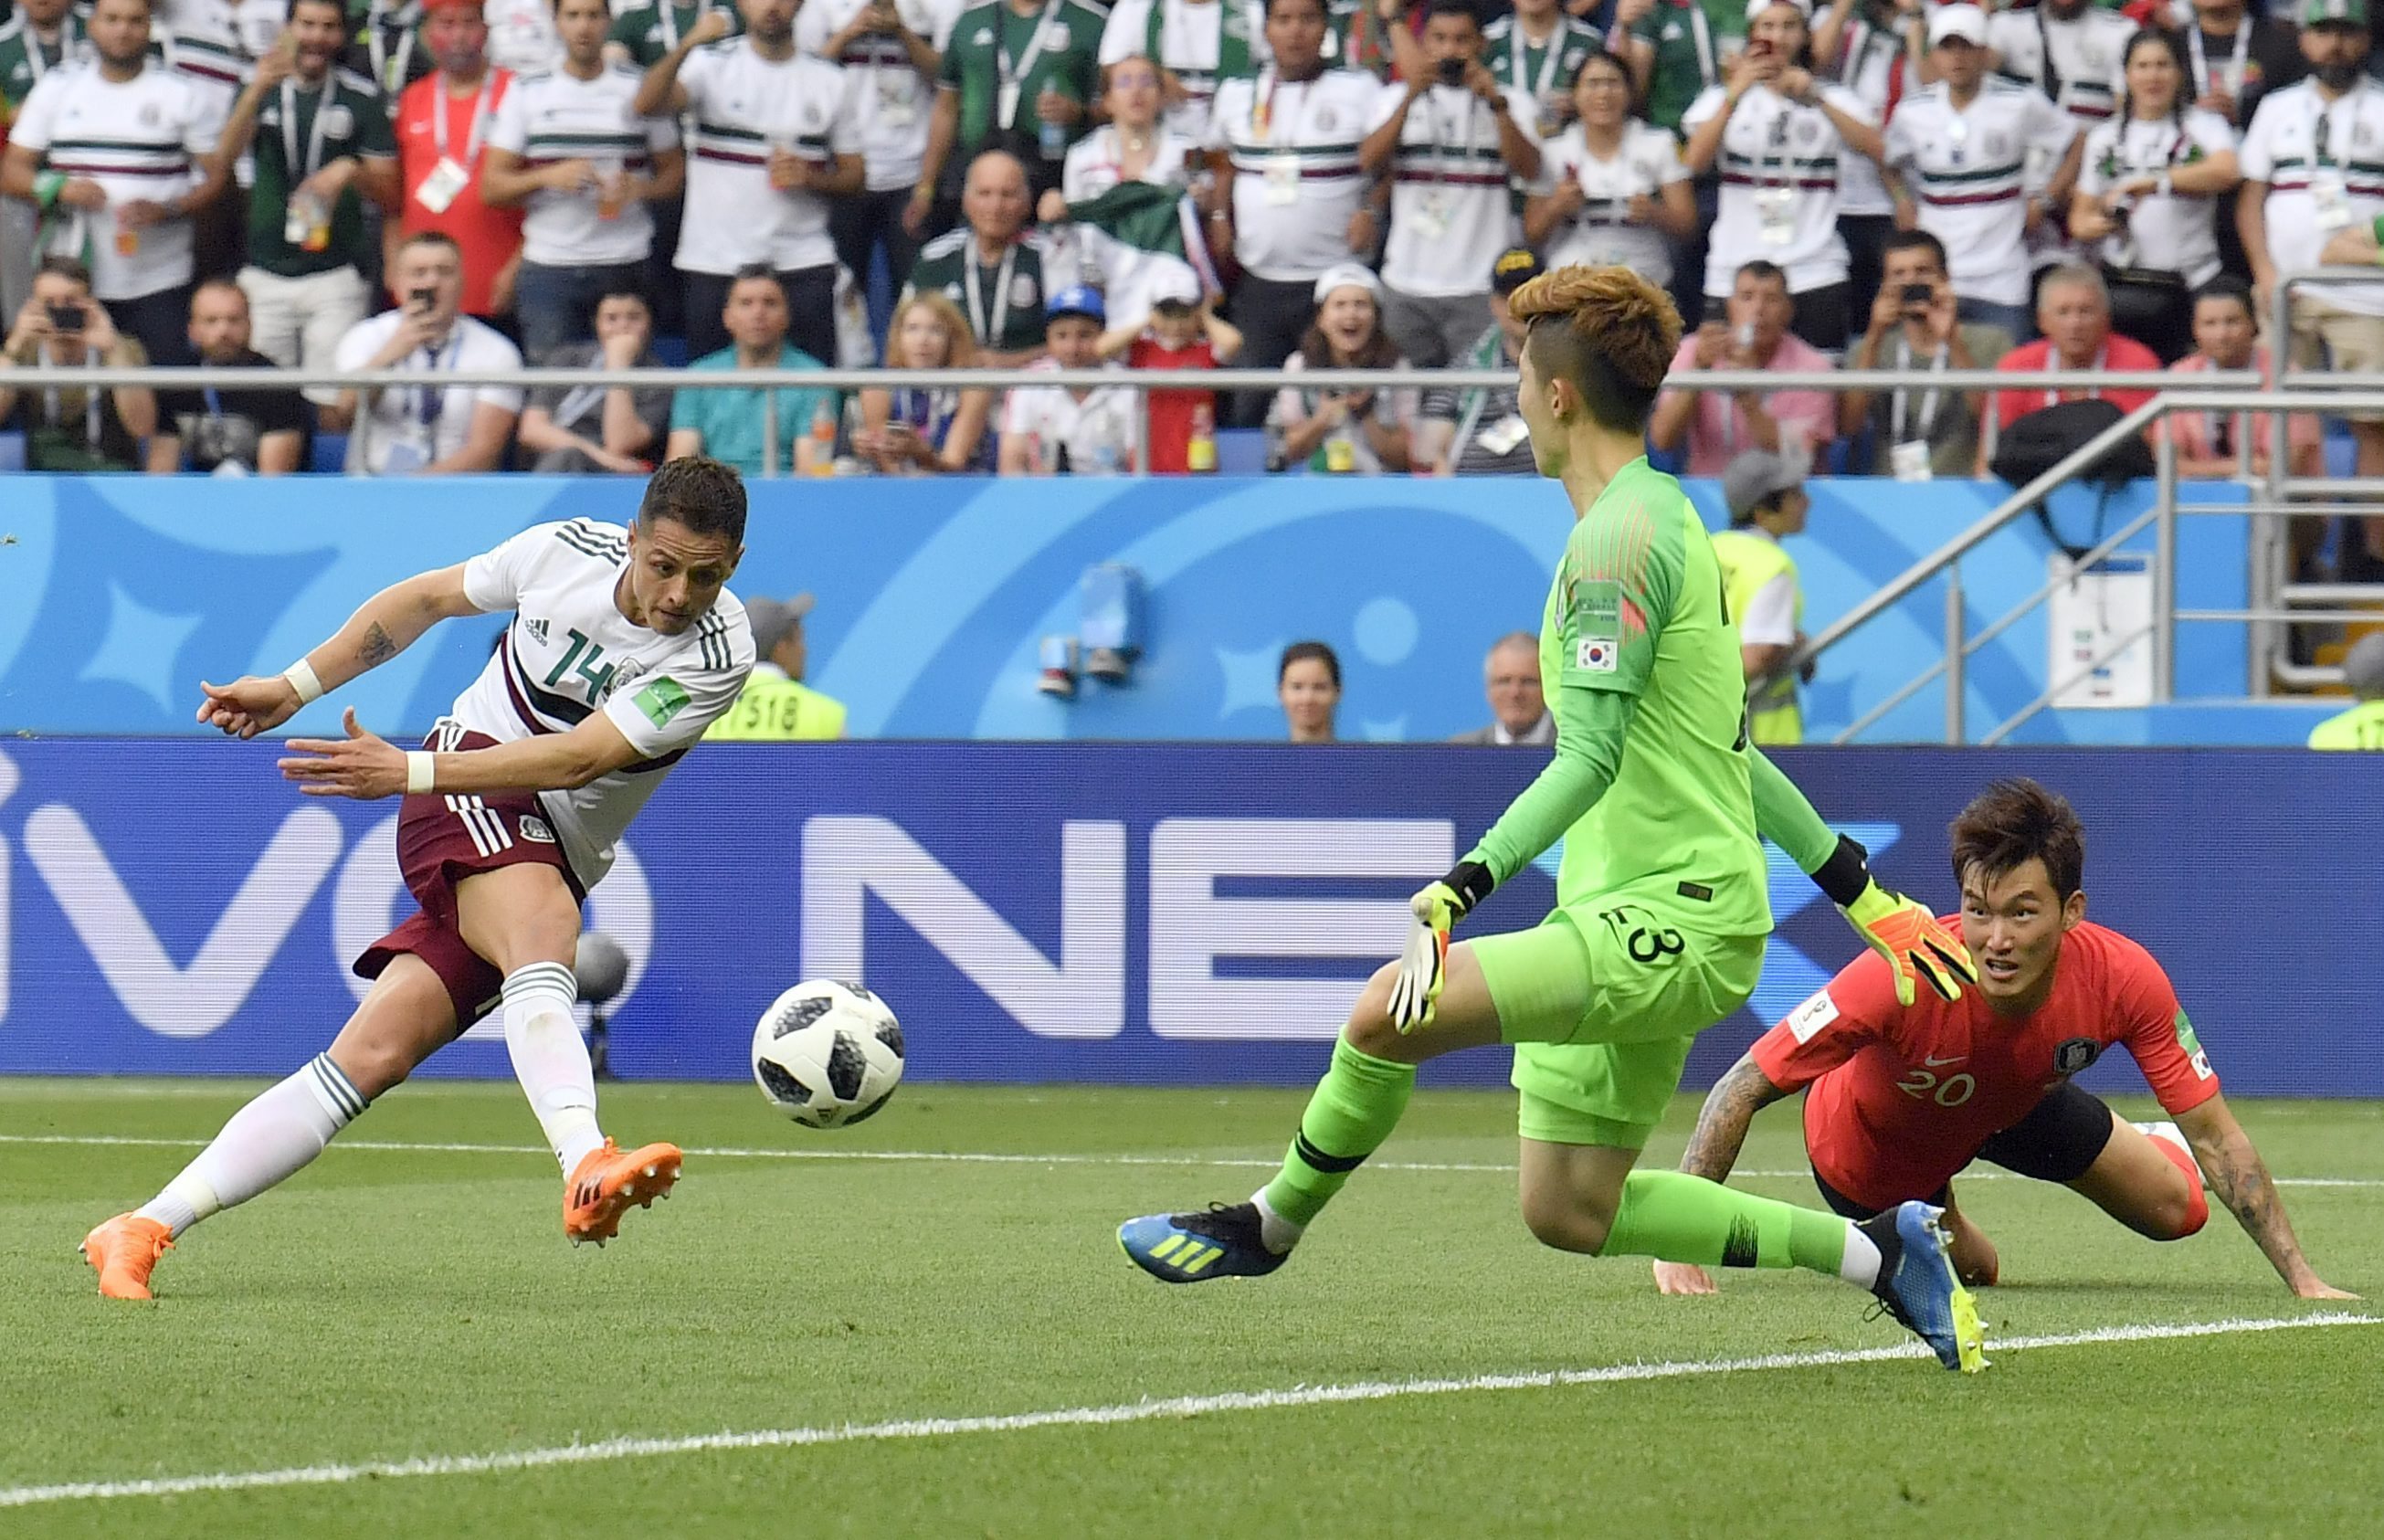 http://www.orissapost.com/wp-content/uploads/2018/06/Javier-Hernandez-L-scores-his-sides-second-goal-during-the-group-F-match-against-South-Korea.jpg